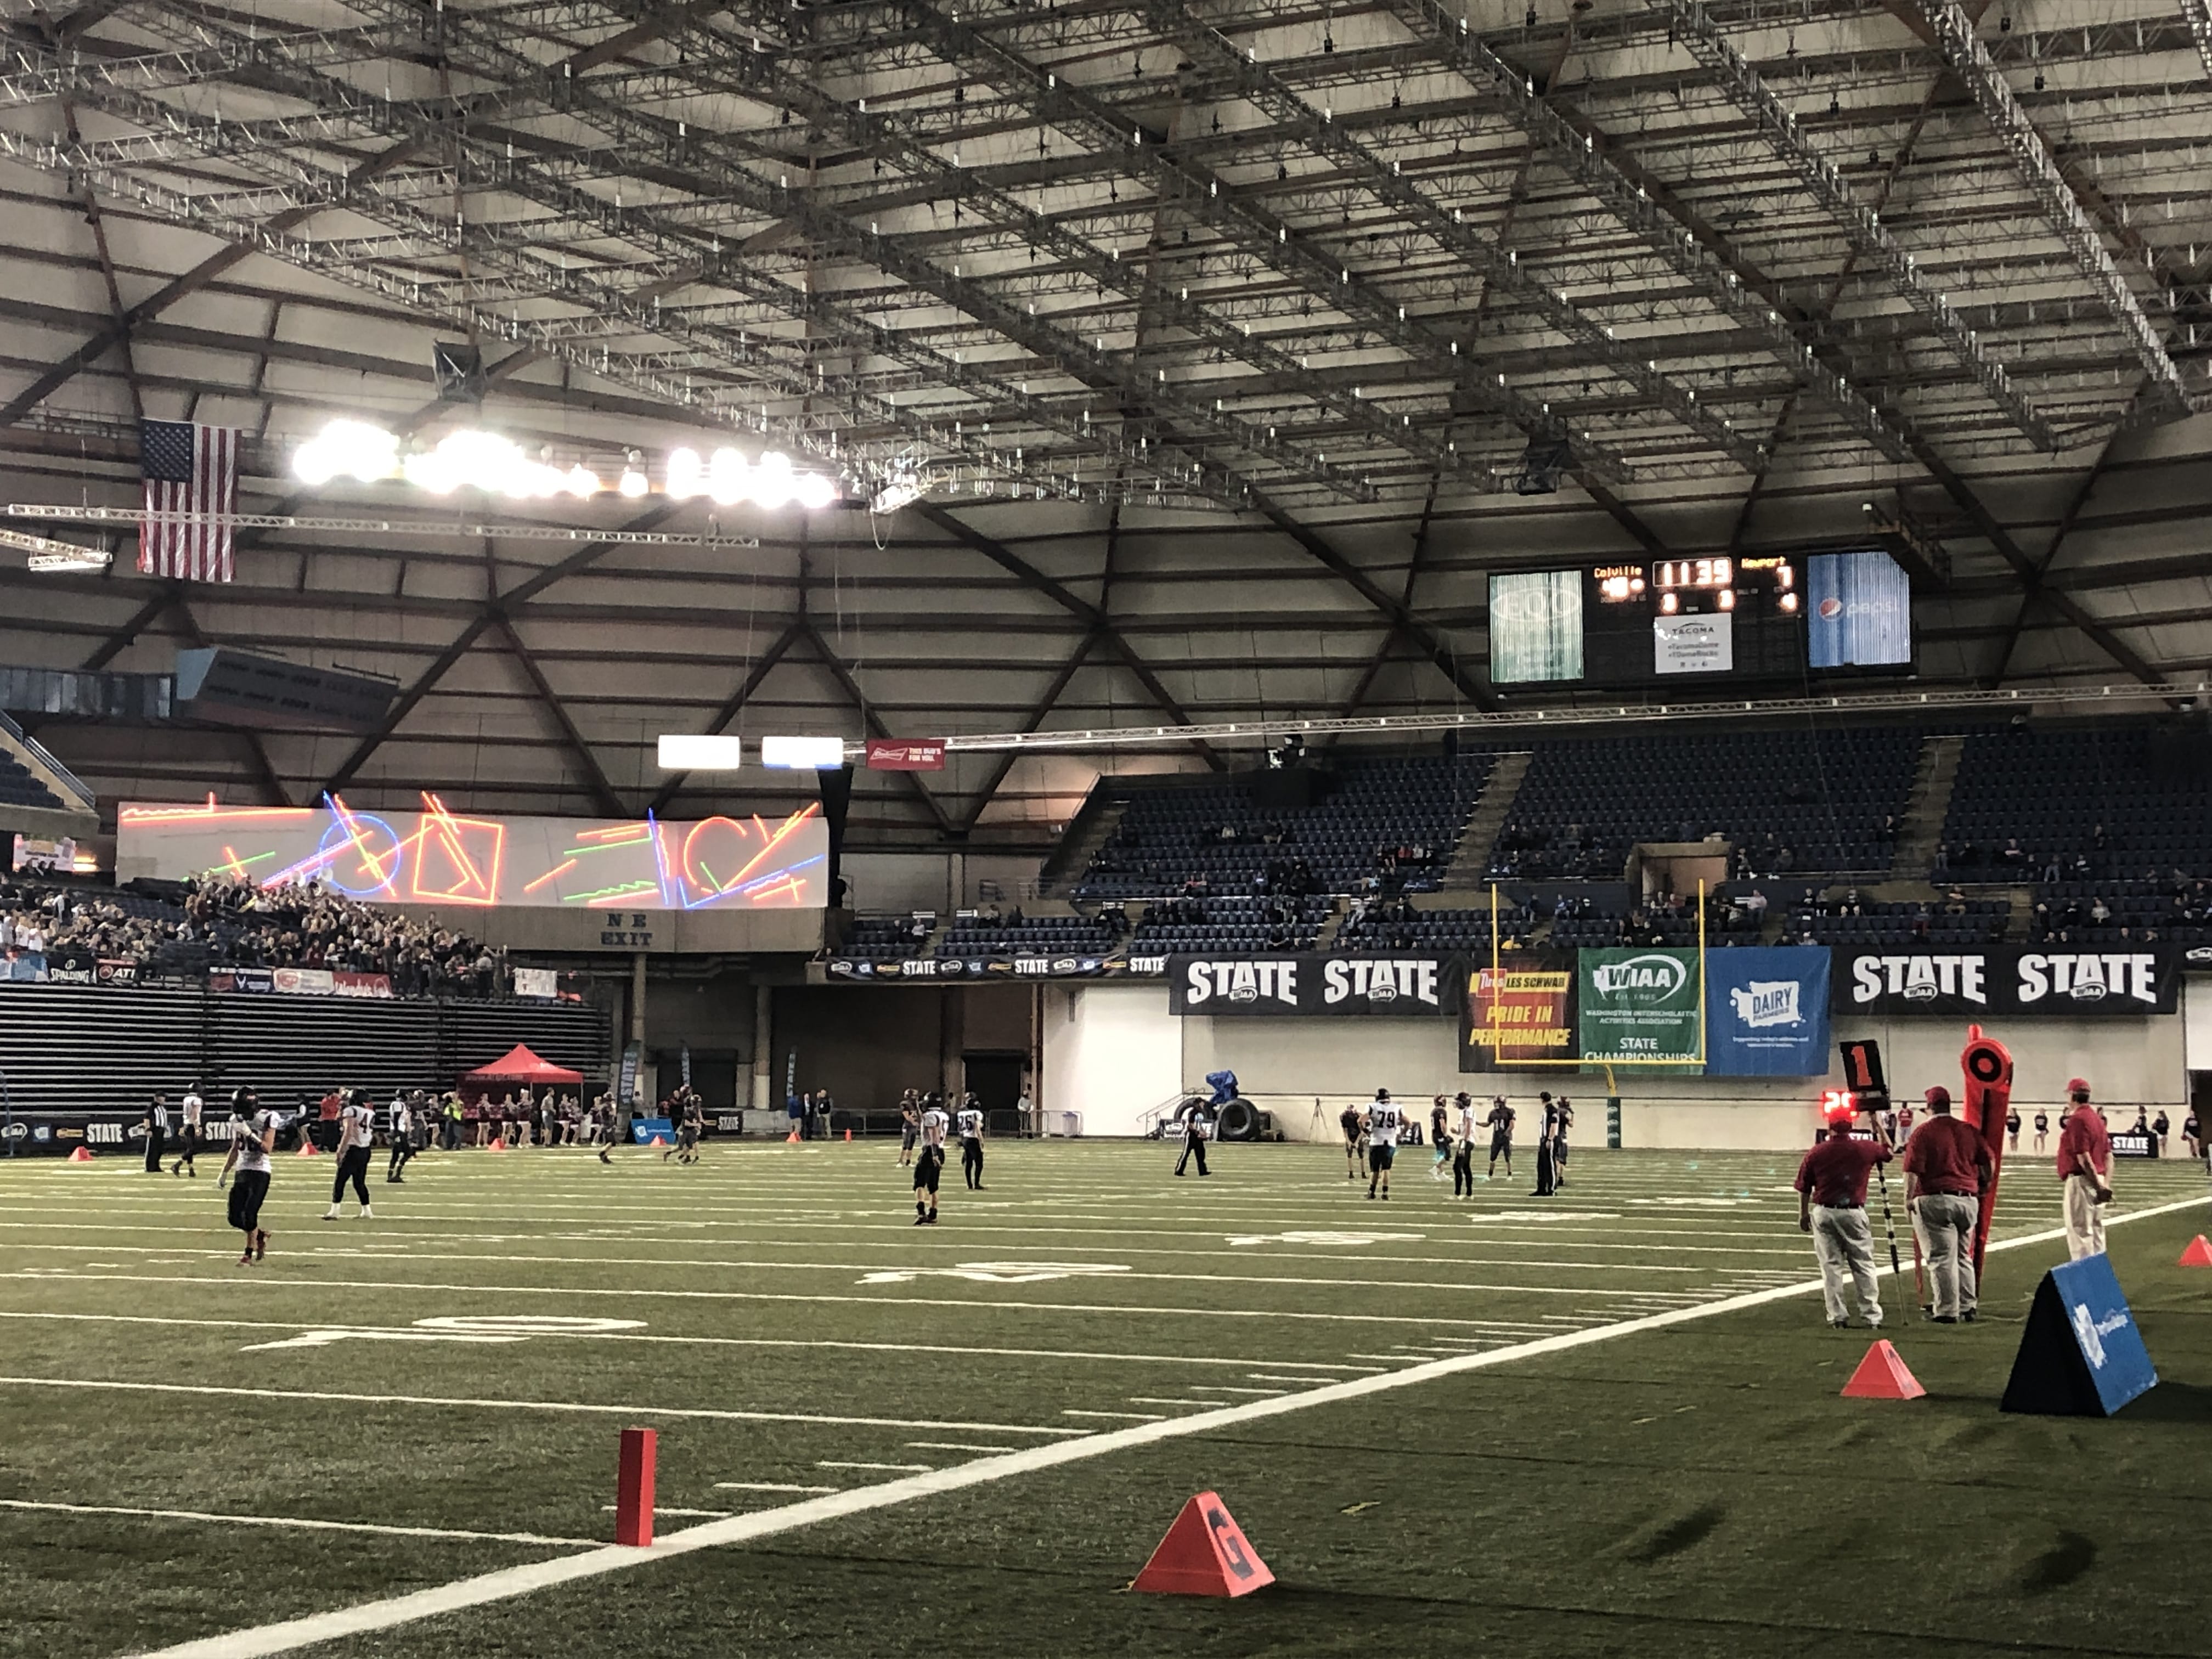 The Tacoma Dome is the site of the WIAA state championship football games. Hockinson faces Lynden in the 2A title game at 1  p.m. Union faces Lake Stevens for the 4A championship at 7 p.m.